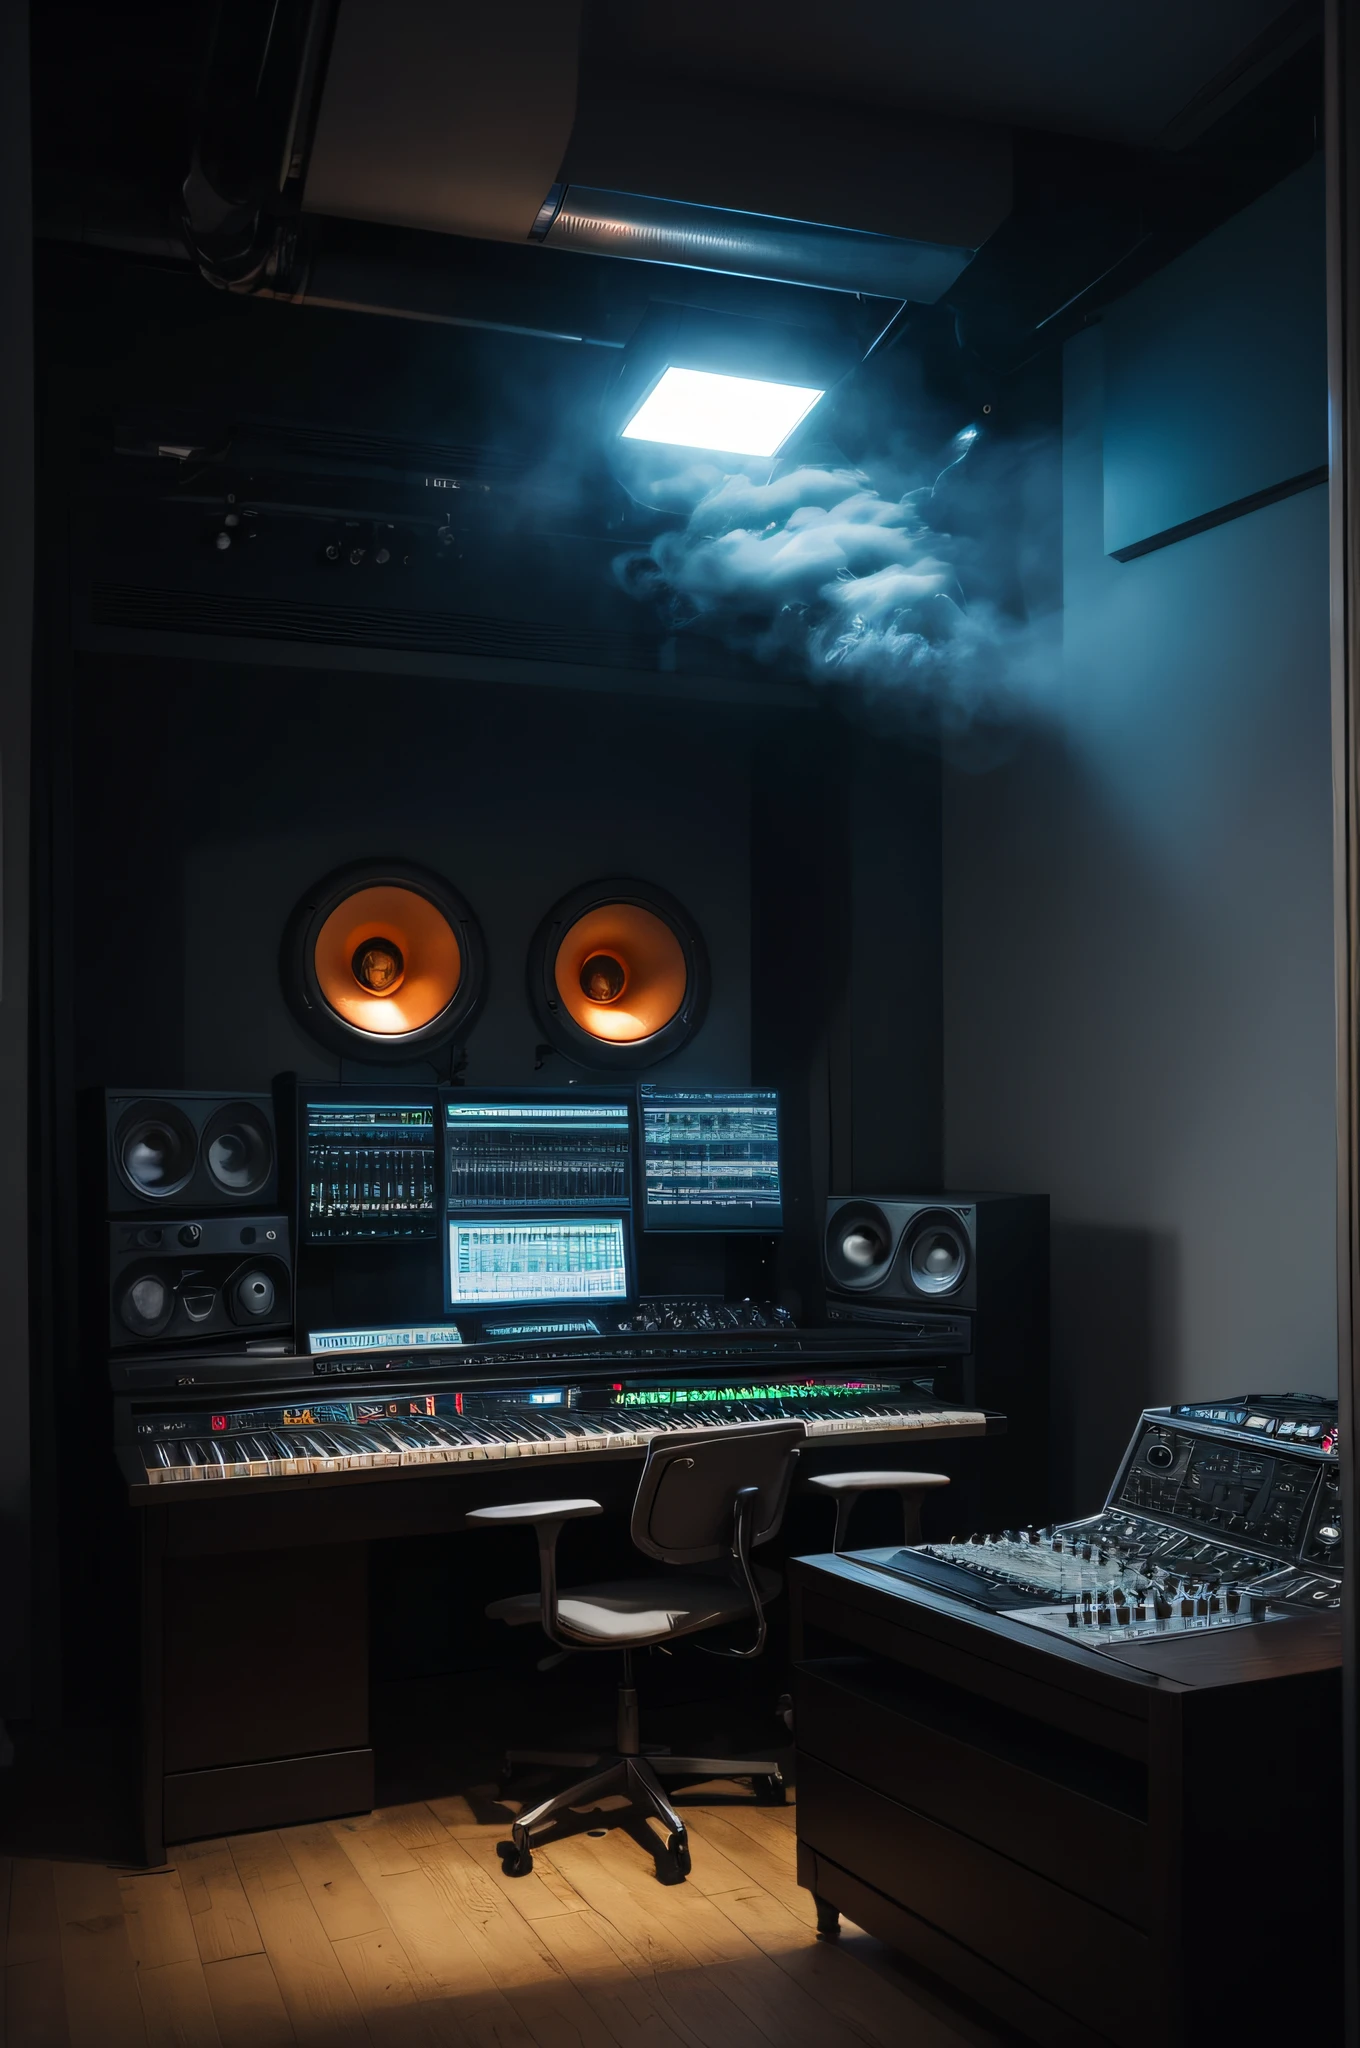 a music studio inside a room with smoke, and white and dark lights, smoke well highlighted